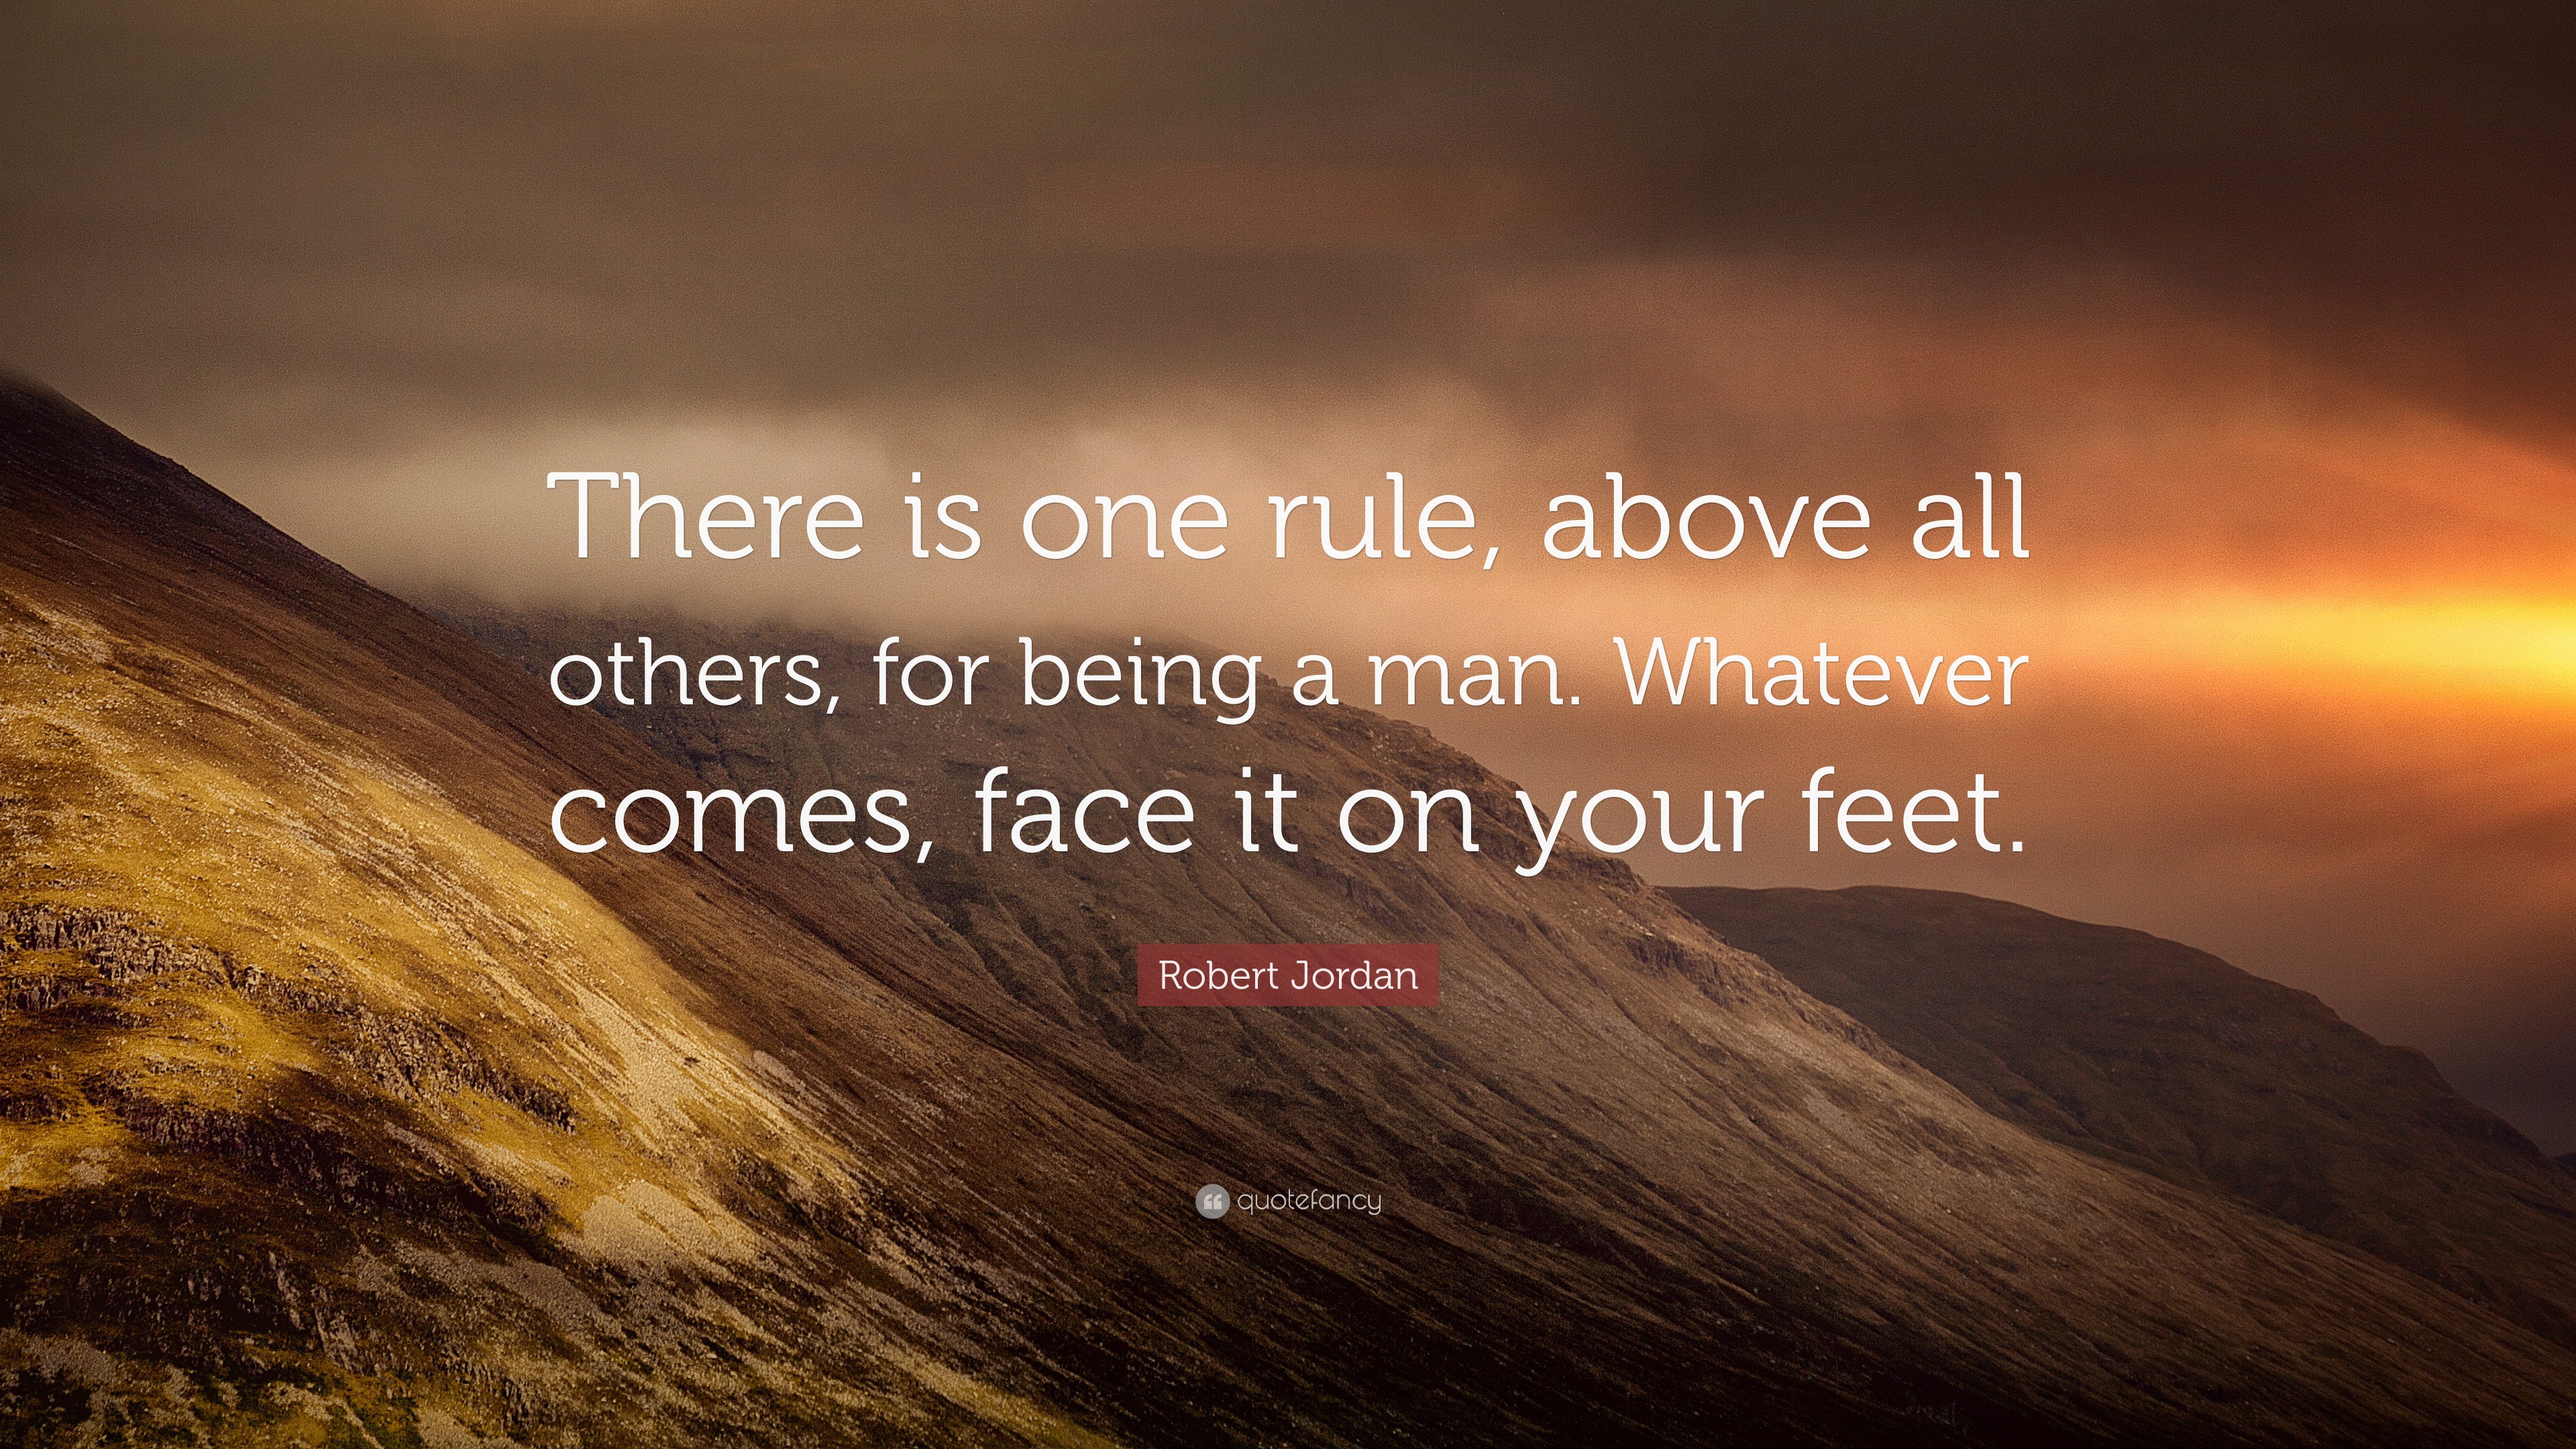 Robert Jordan Quote: “There is one rule, above all others, for being a man.  Whatever comes,